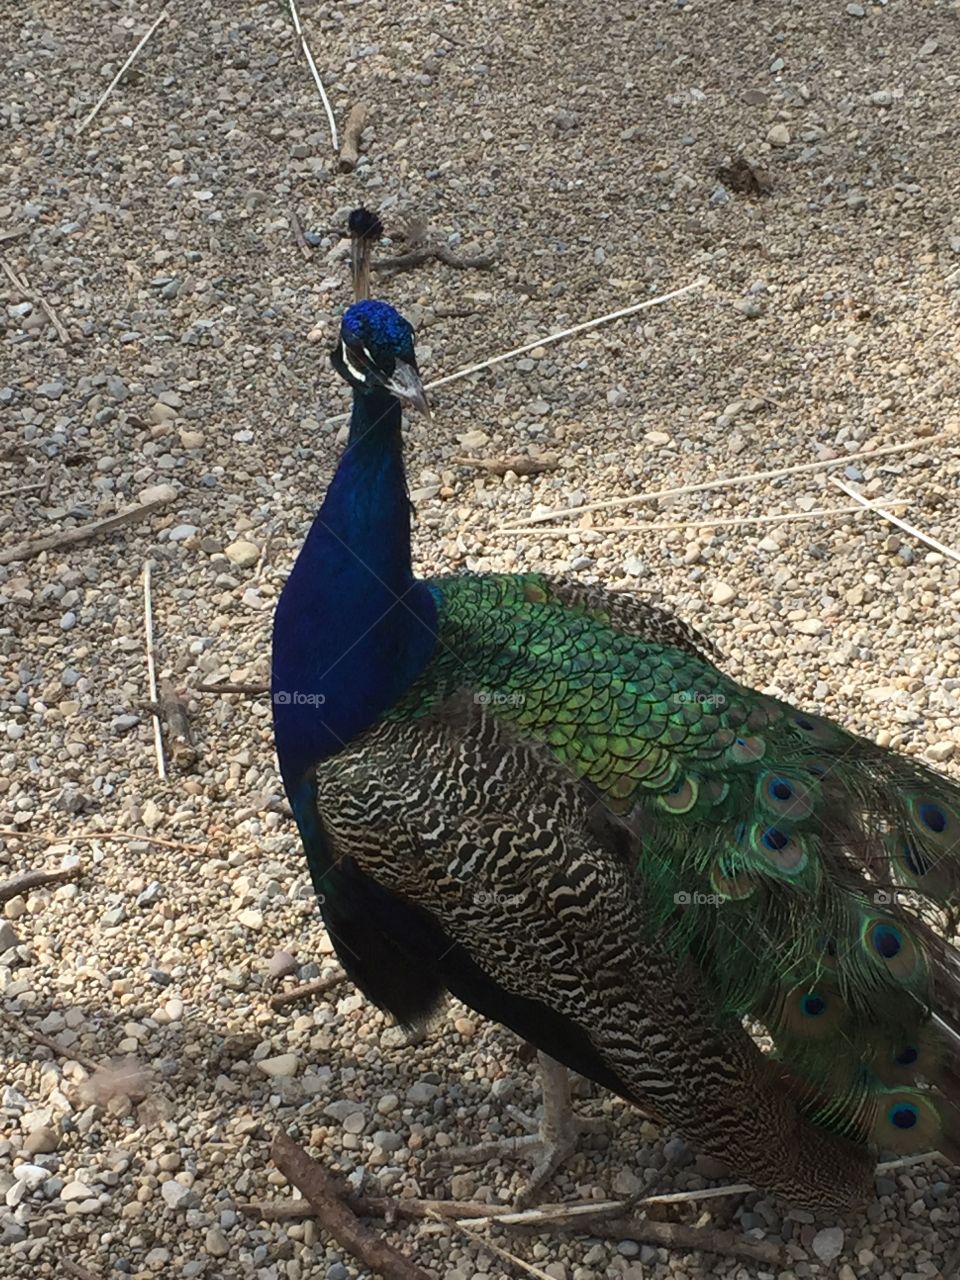 An absolutely beautiful male peacock 